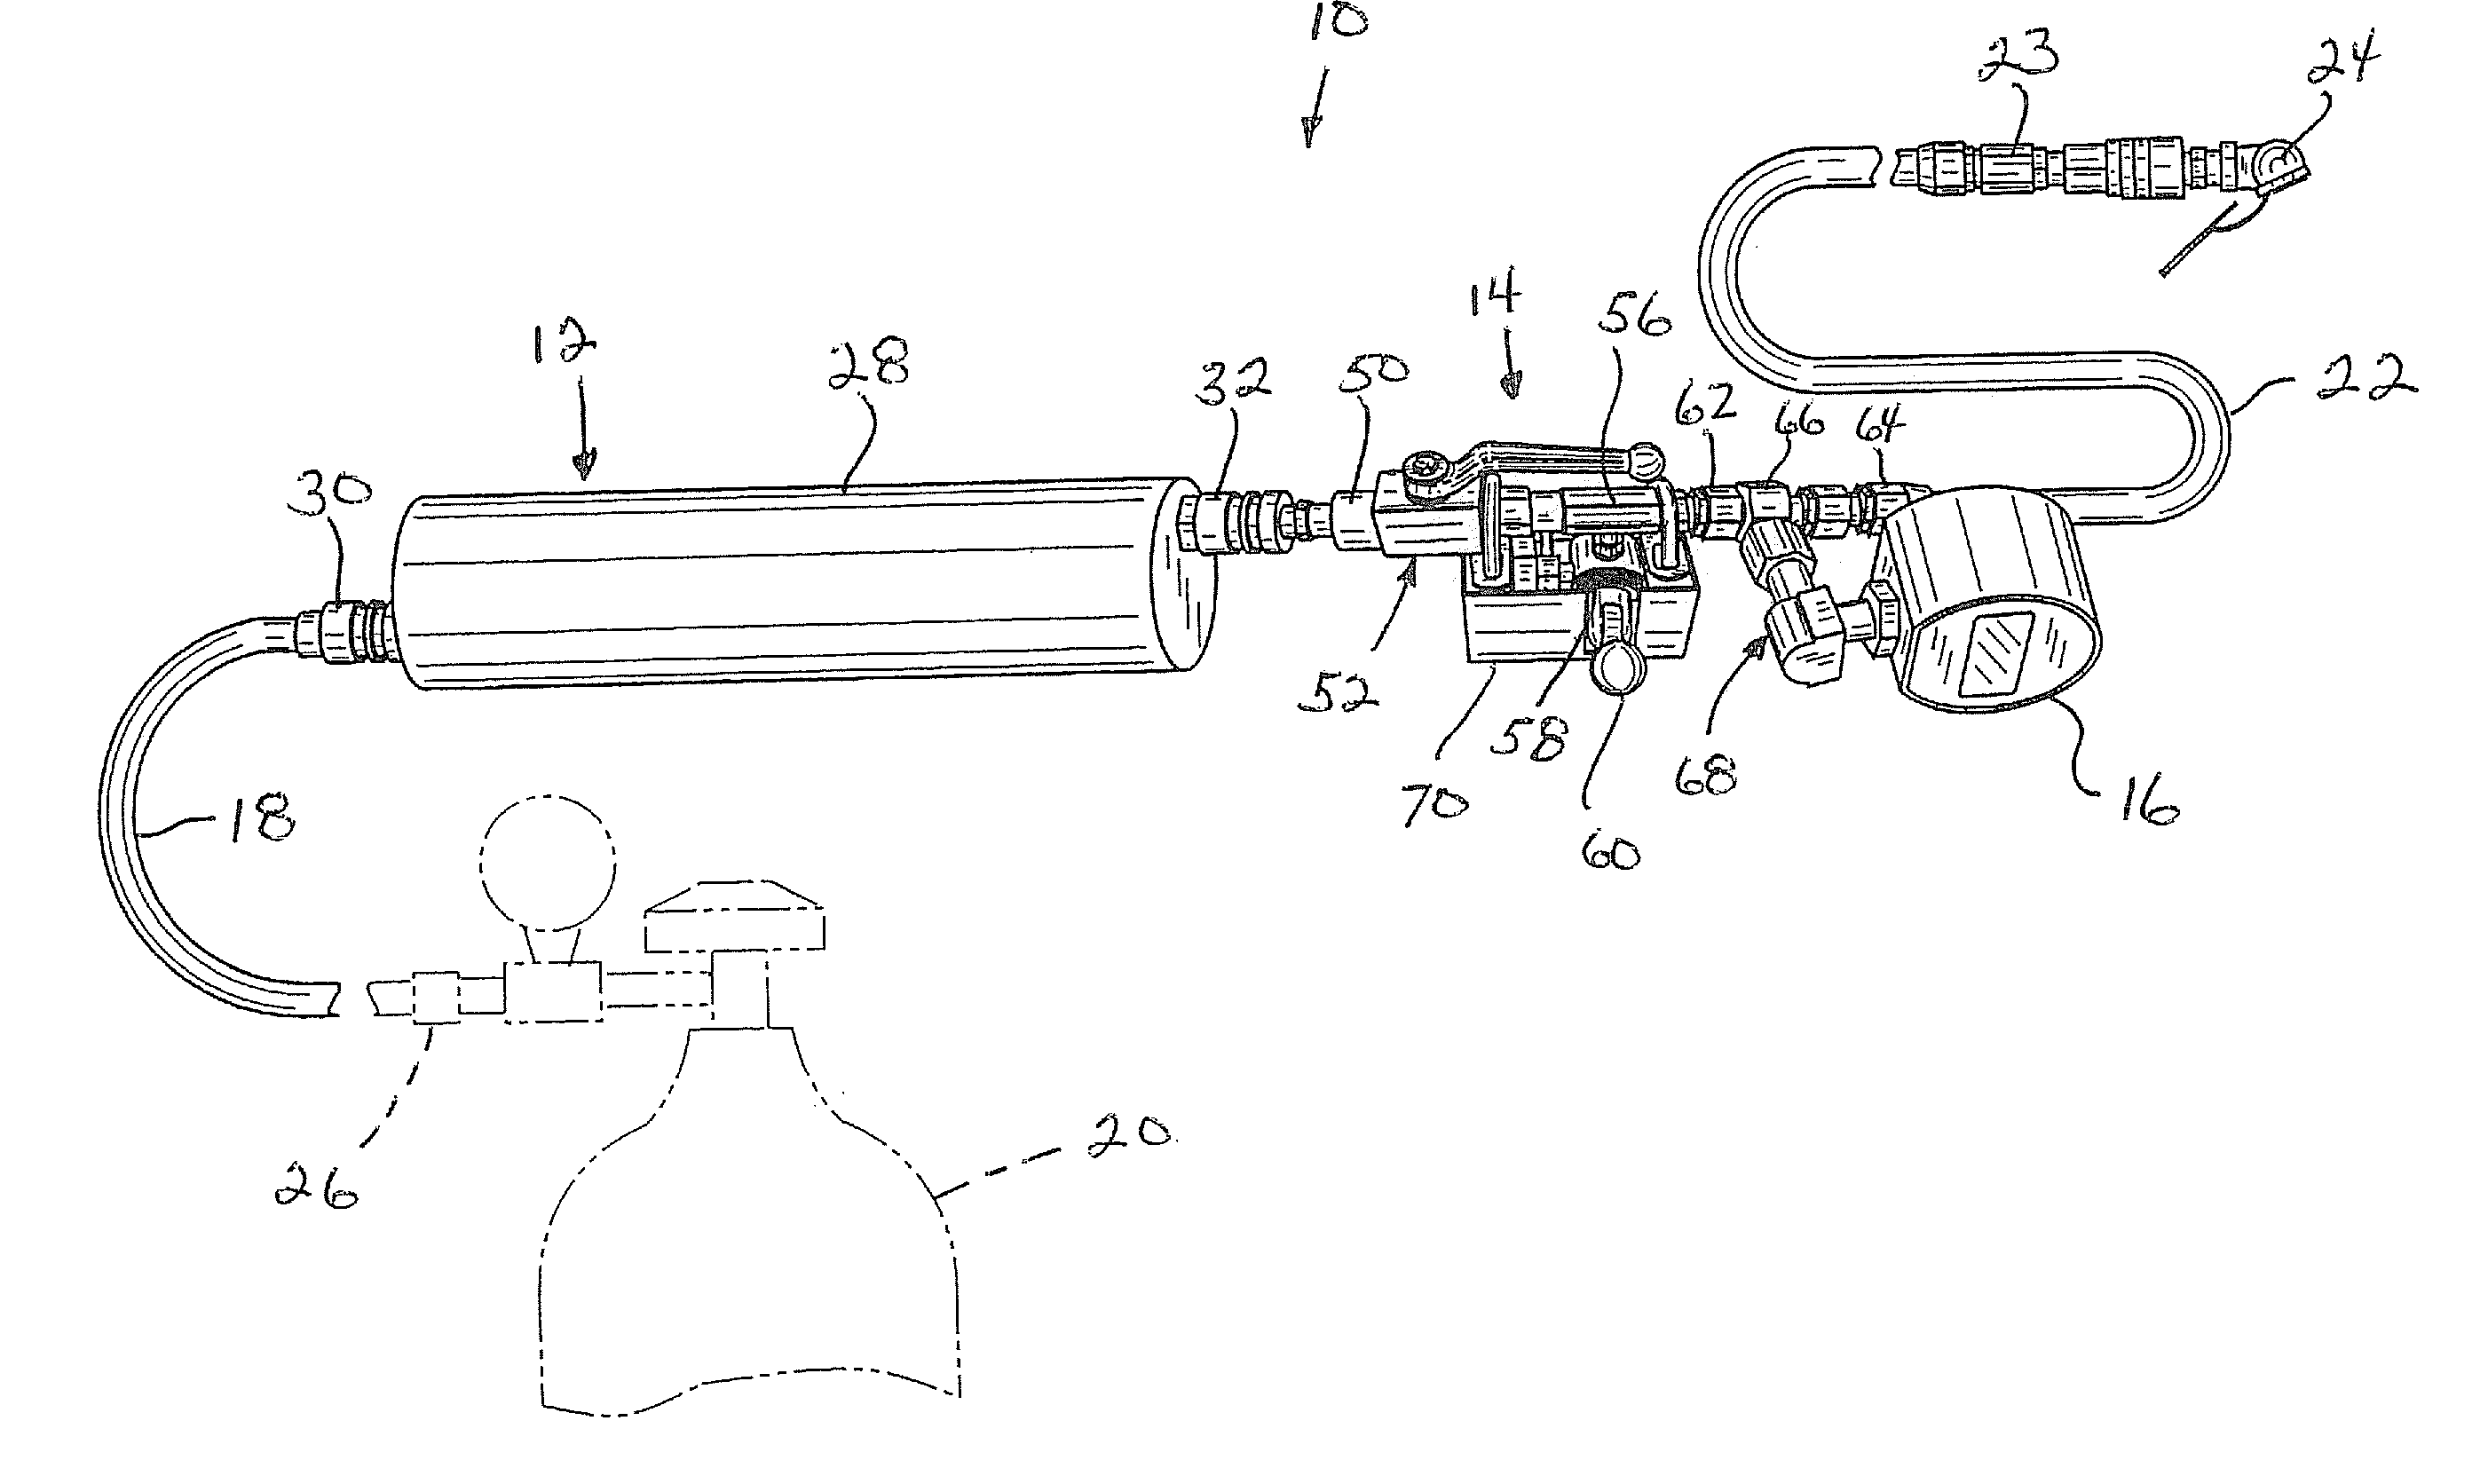 Tire purge/fill apparatus and method for use in a racing environment